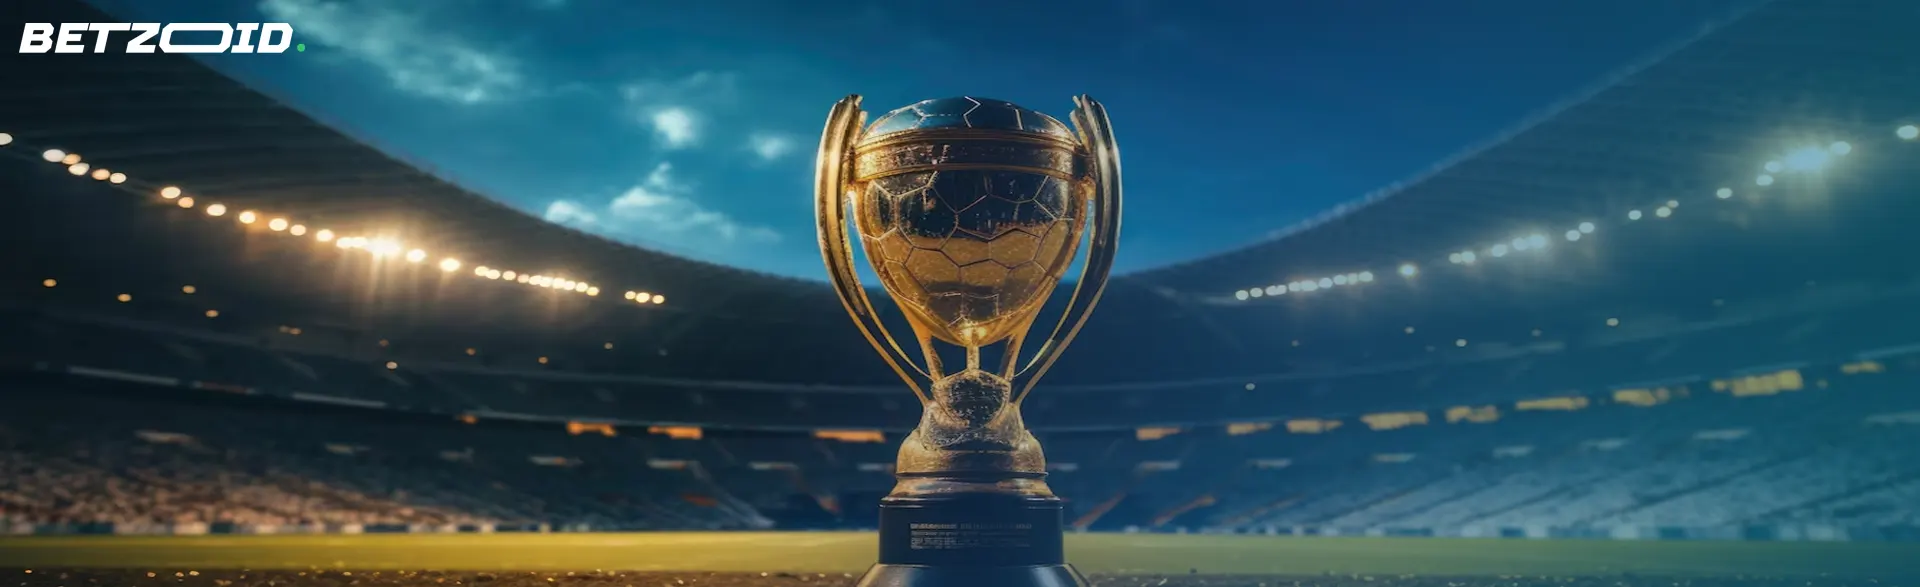 A golden trophy shining under stadium lights, highlighting the best soccer bookmakers for bet to leagues.